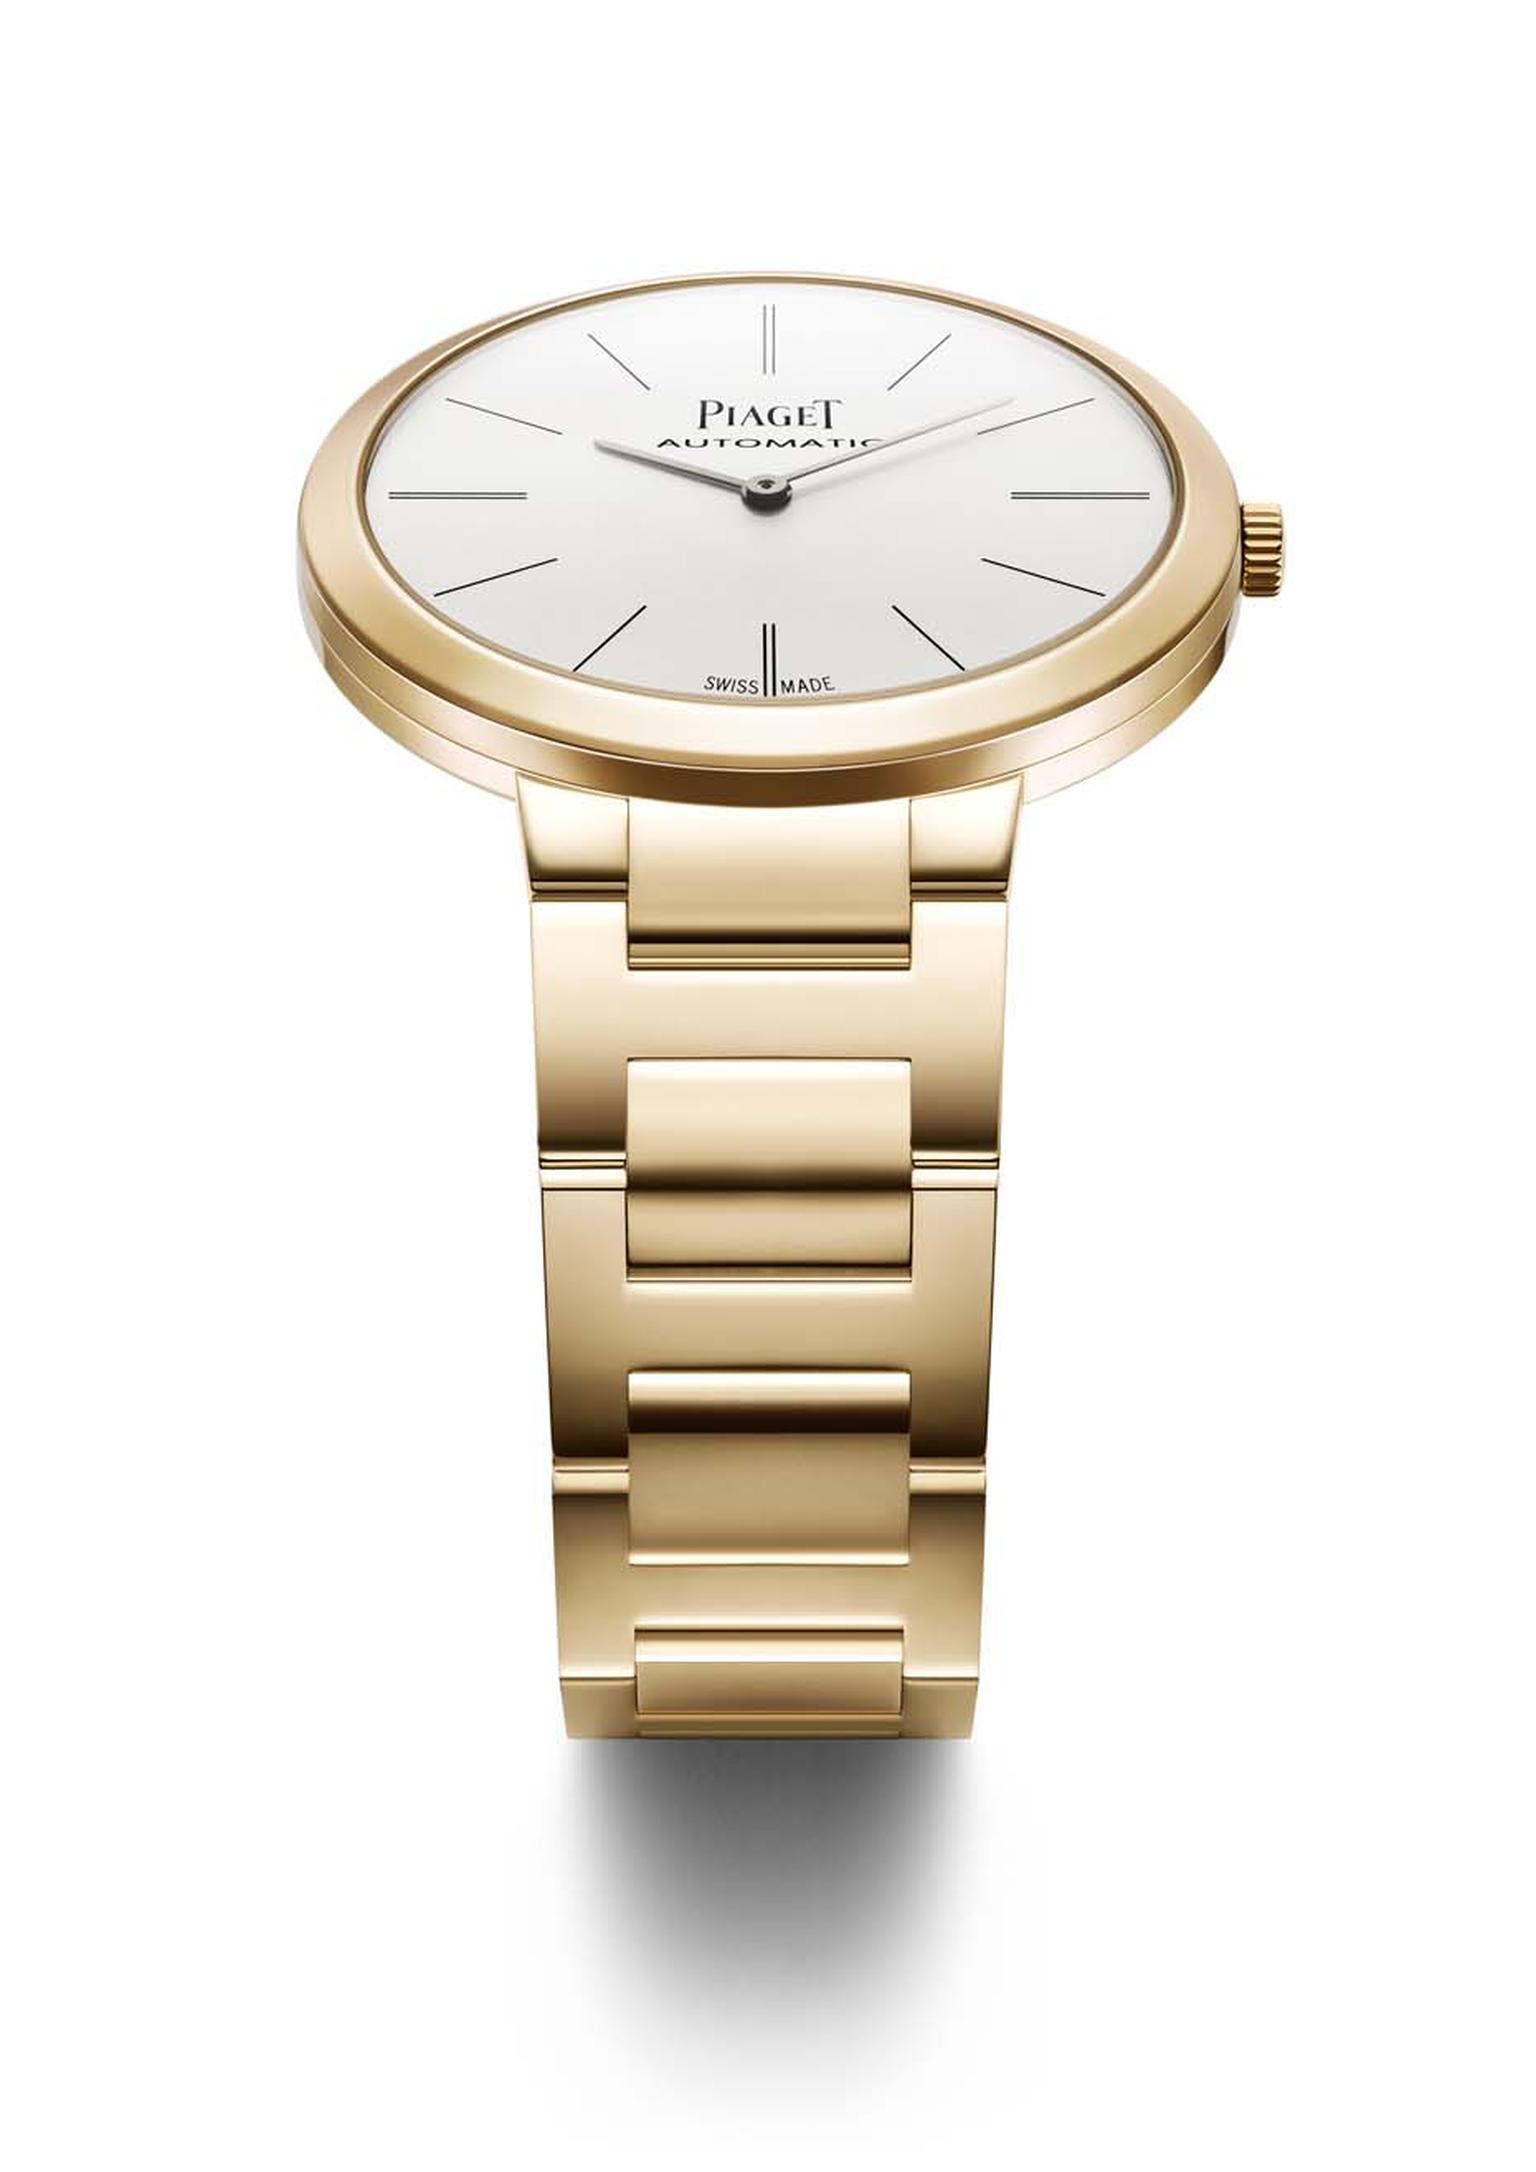 Piaget watches have always been admired for their ultra-thin movements and lean profiles, making them ideal dress watches. The new Altiplano collection with gold bracelet is no exception, including this 38mm rose gold model for men.